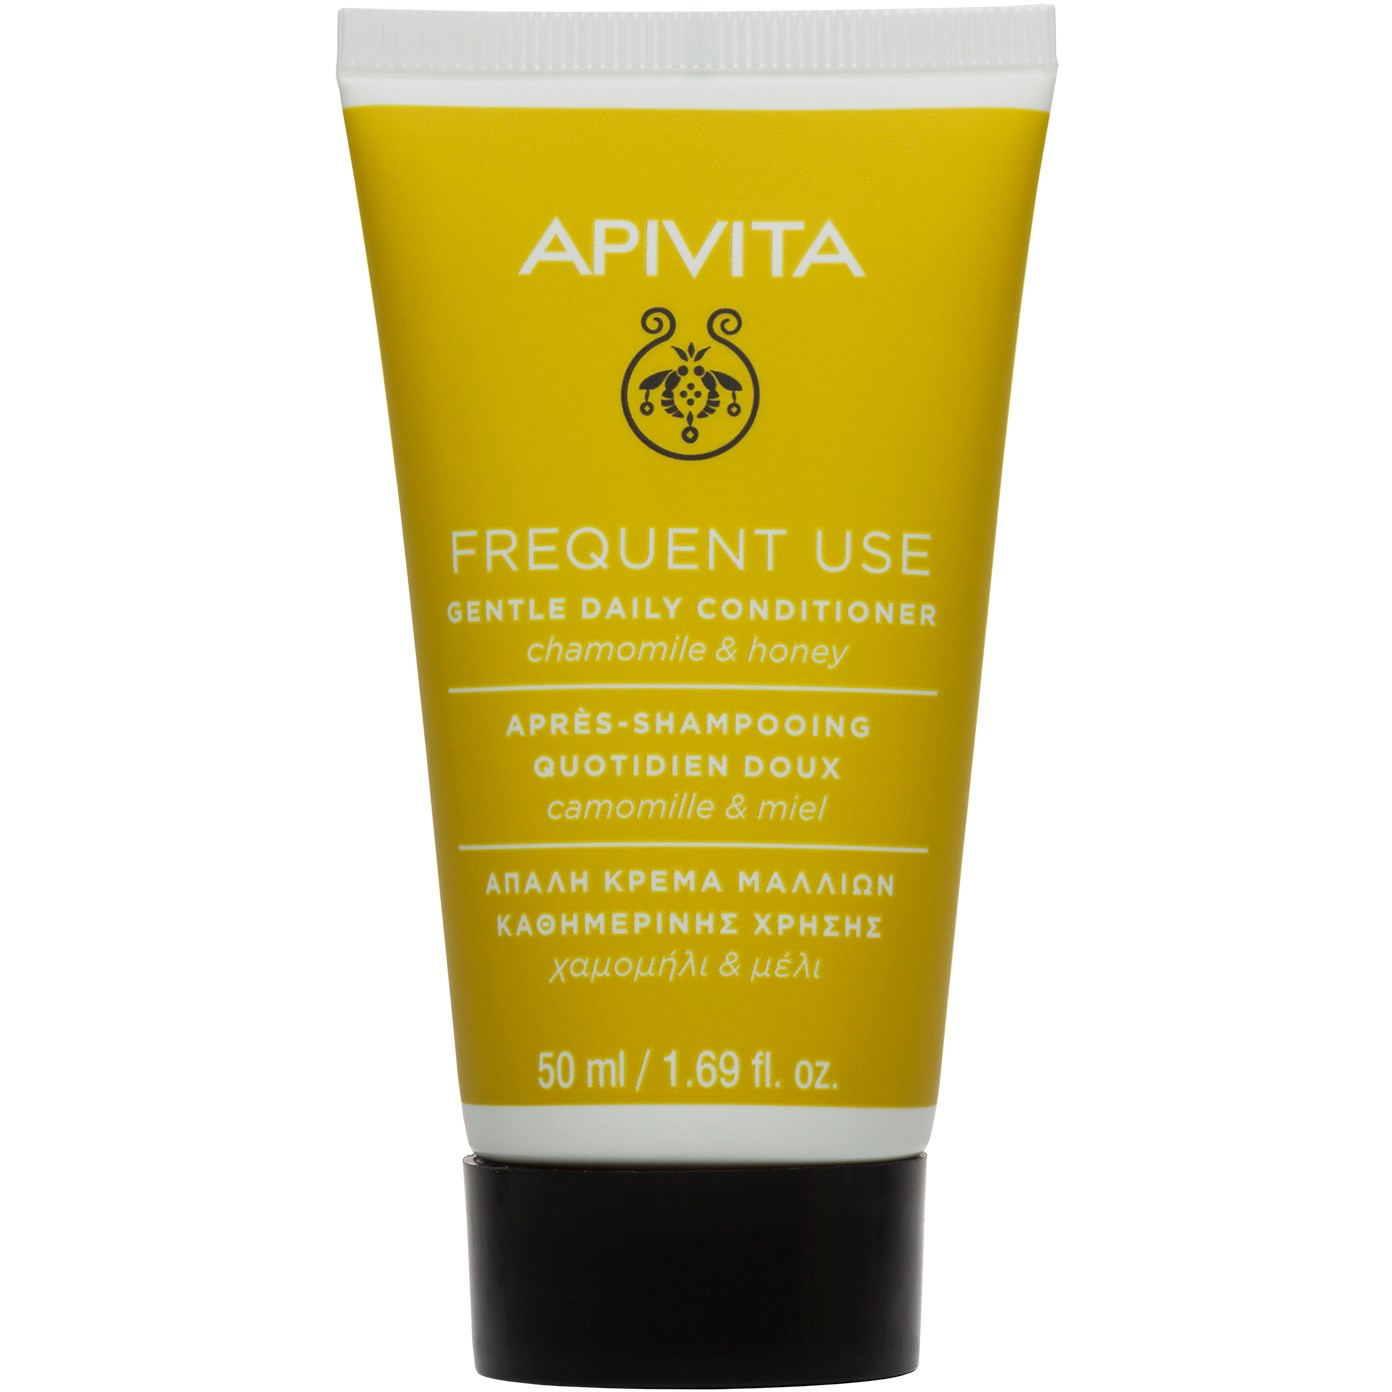 APIVITA Frequent Use Travel Size Gentle Daily Conditioner 50 ml